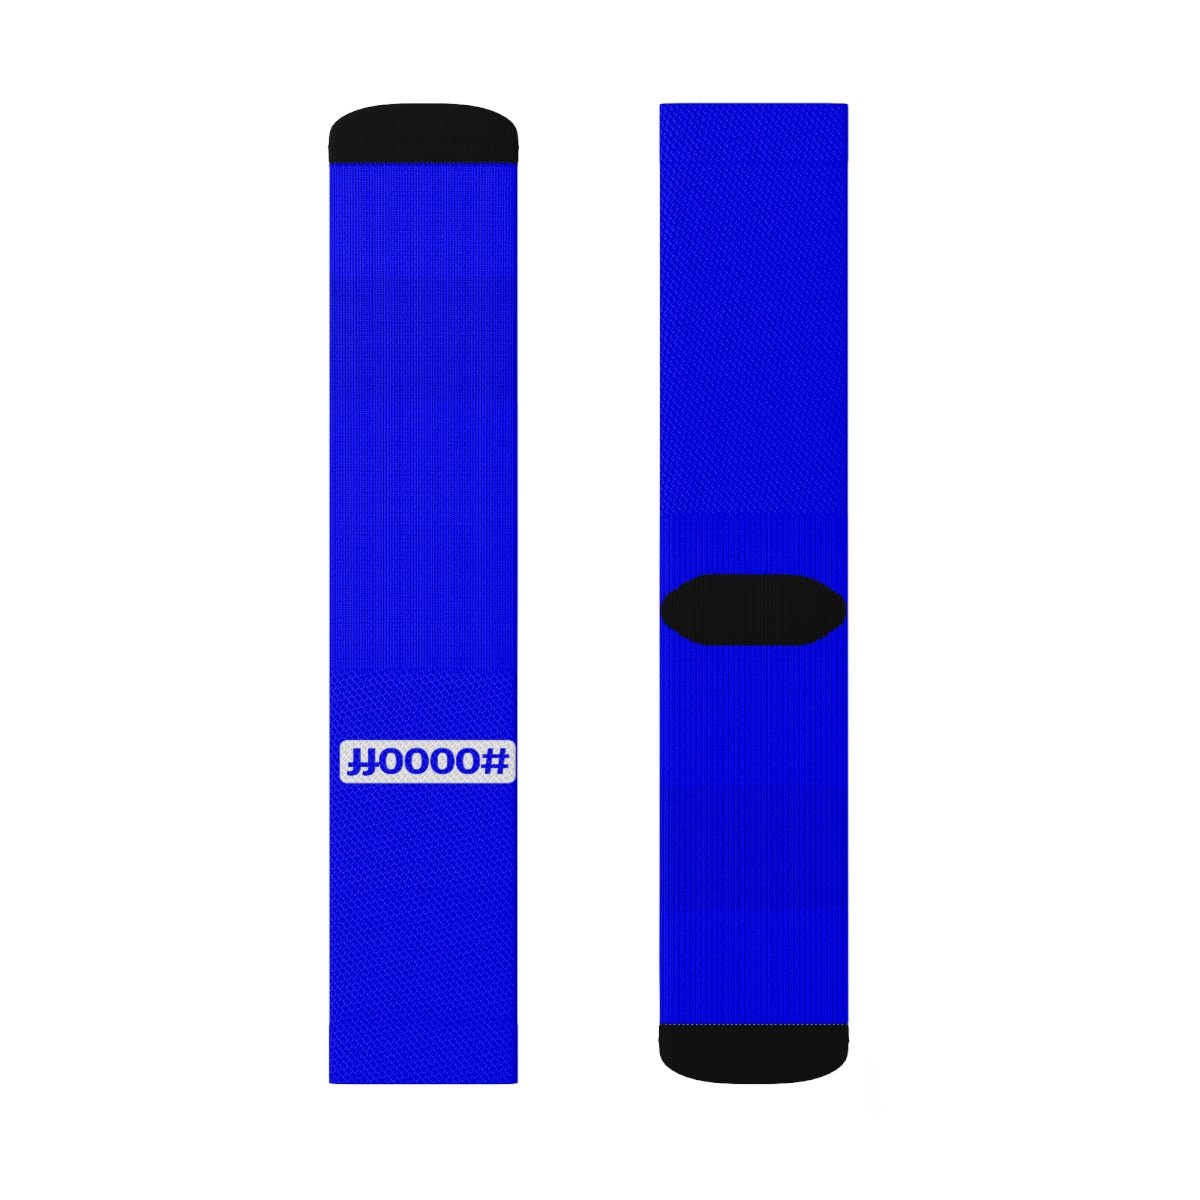 Bluer than Blue Hex Sox #Know the Code Socks cmyk rgb html css color picker web hexadecimal chart site photoshop